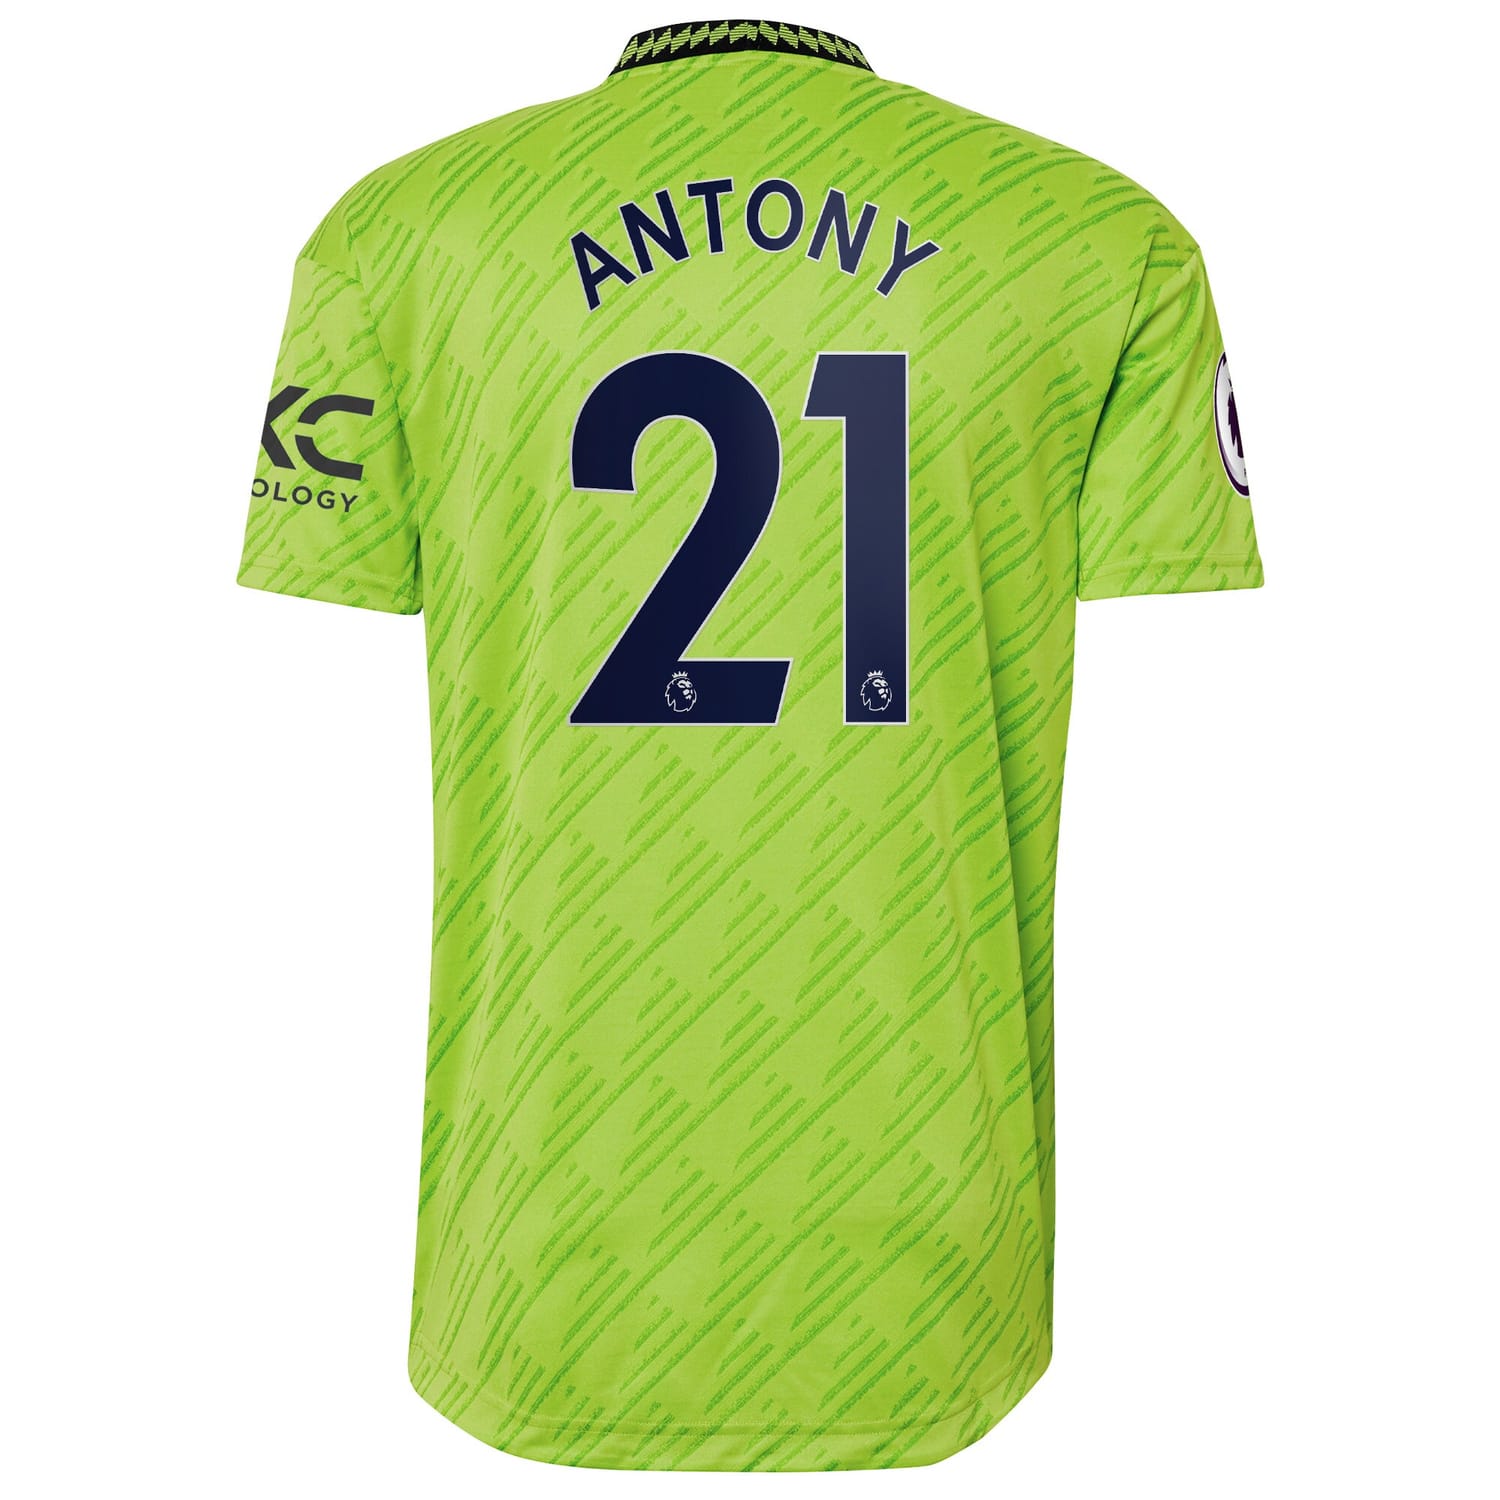 Premier League Manchester United Third Authentic Jersey Shirt Neon Green 2022-23 player Antony printing for Men